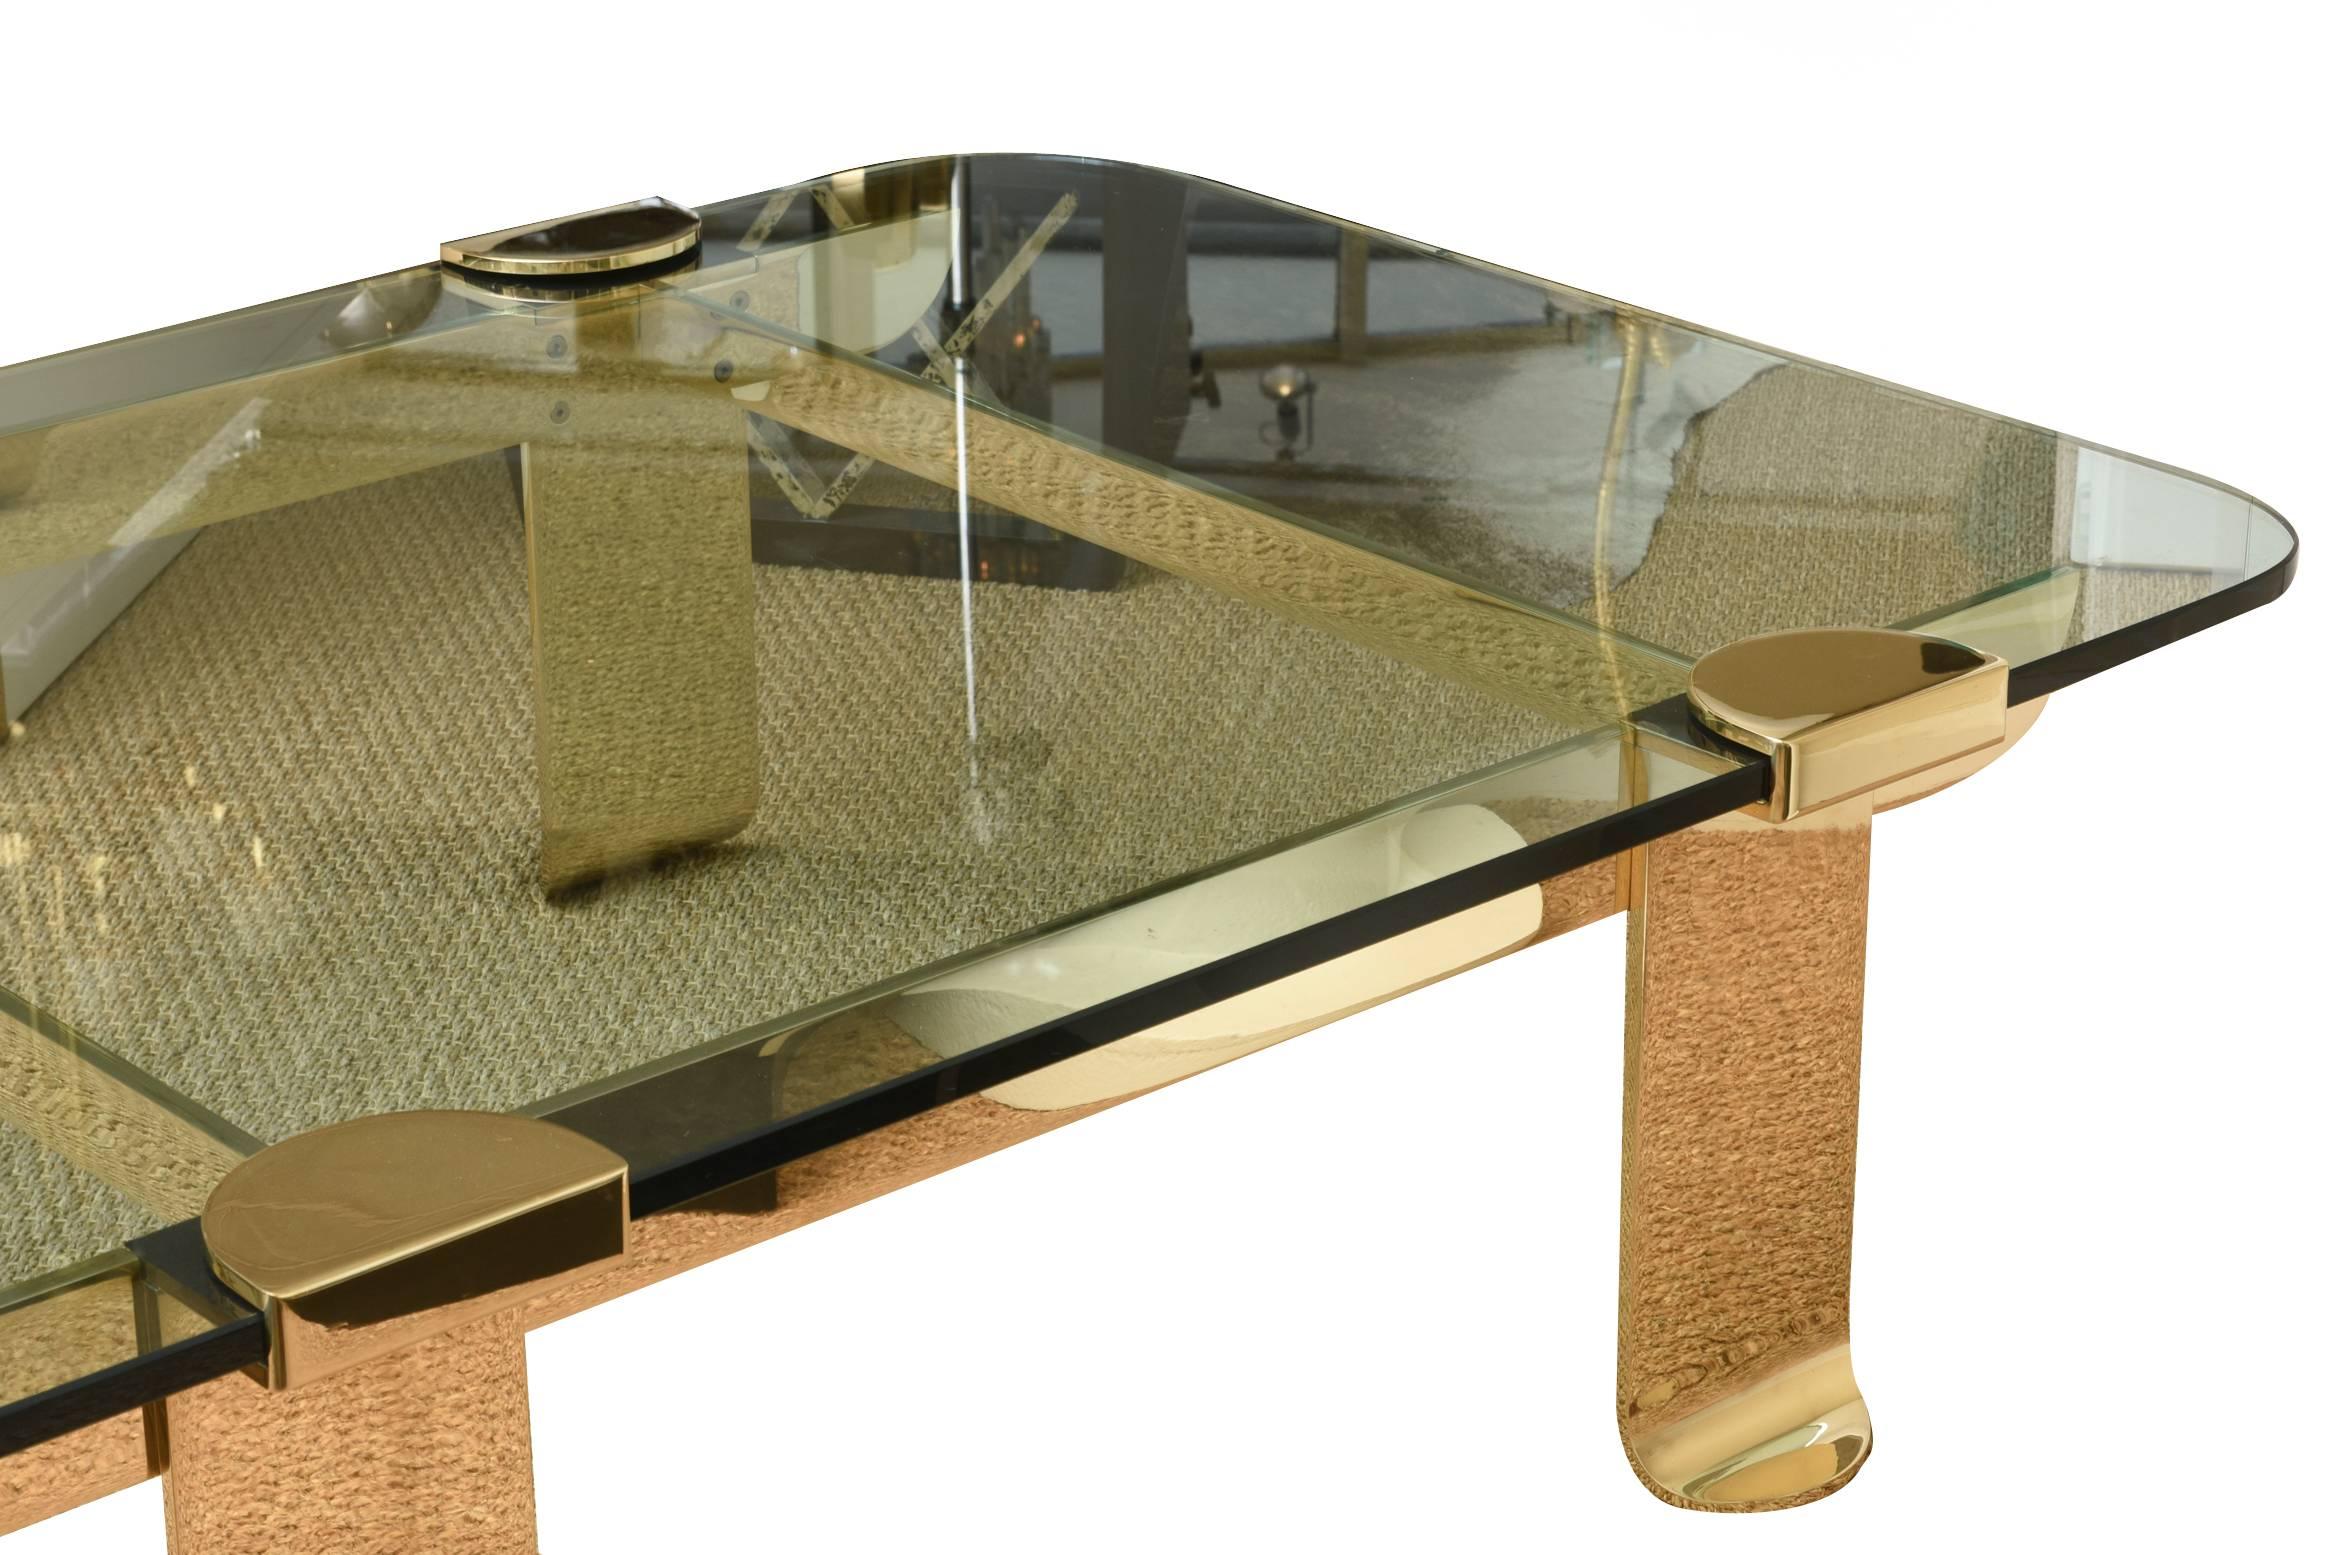 This spectacular and well-made stellar vintage Italian solid brass and glass cocktail table is one of the finest pieces of a cocktail table we have seen in a long time. The brass has been polished professionally but was not lacquered. It is European